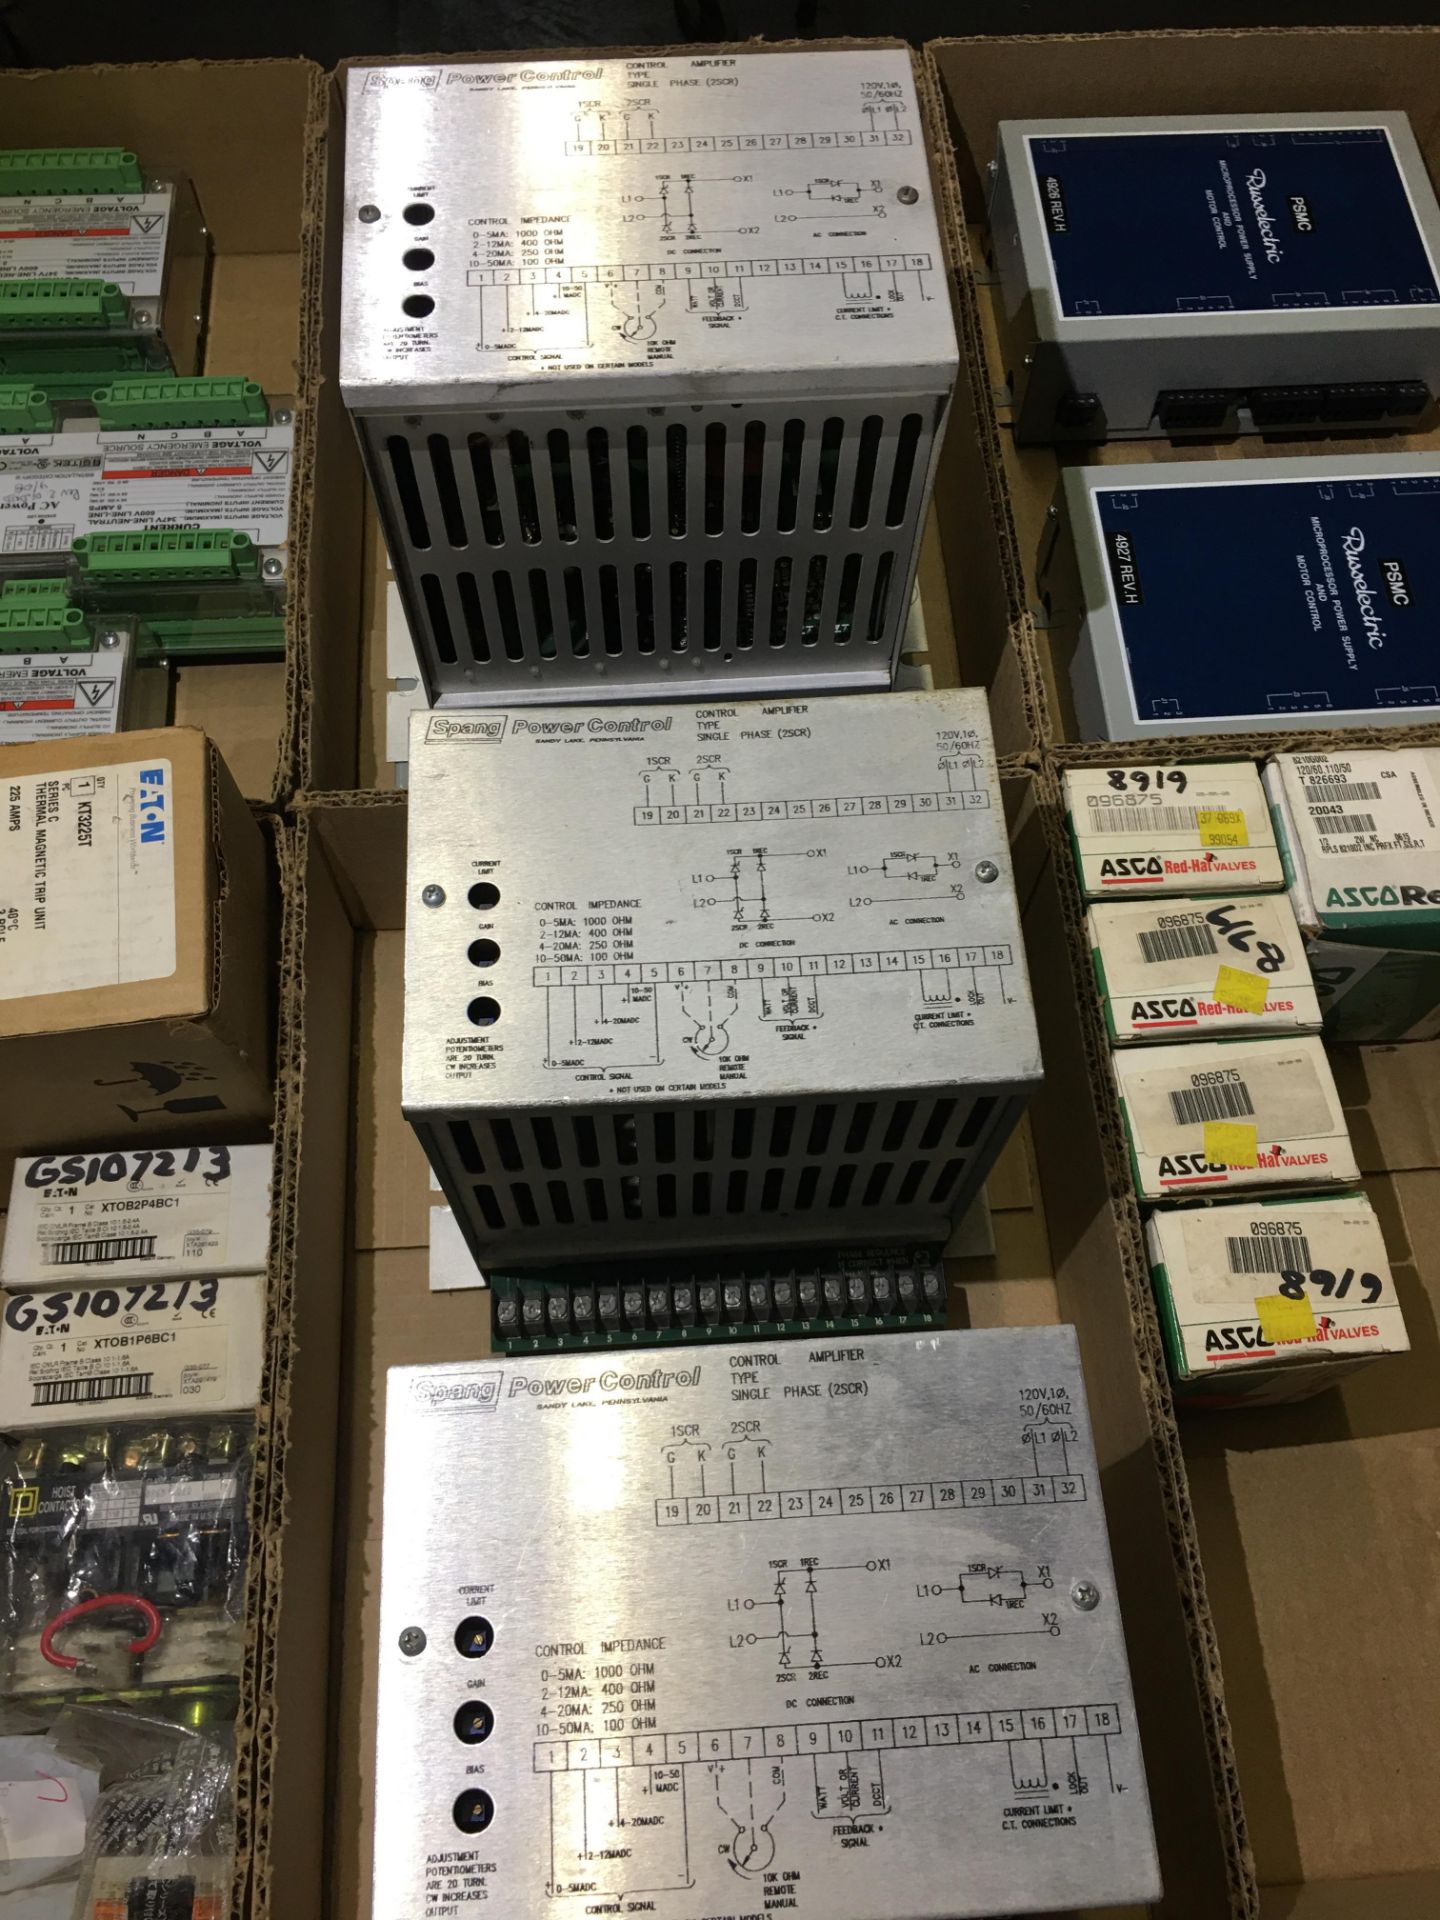 Spang Power Control Amplifiers